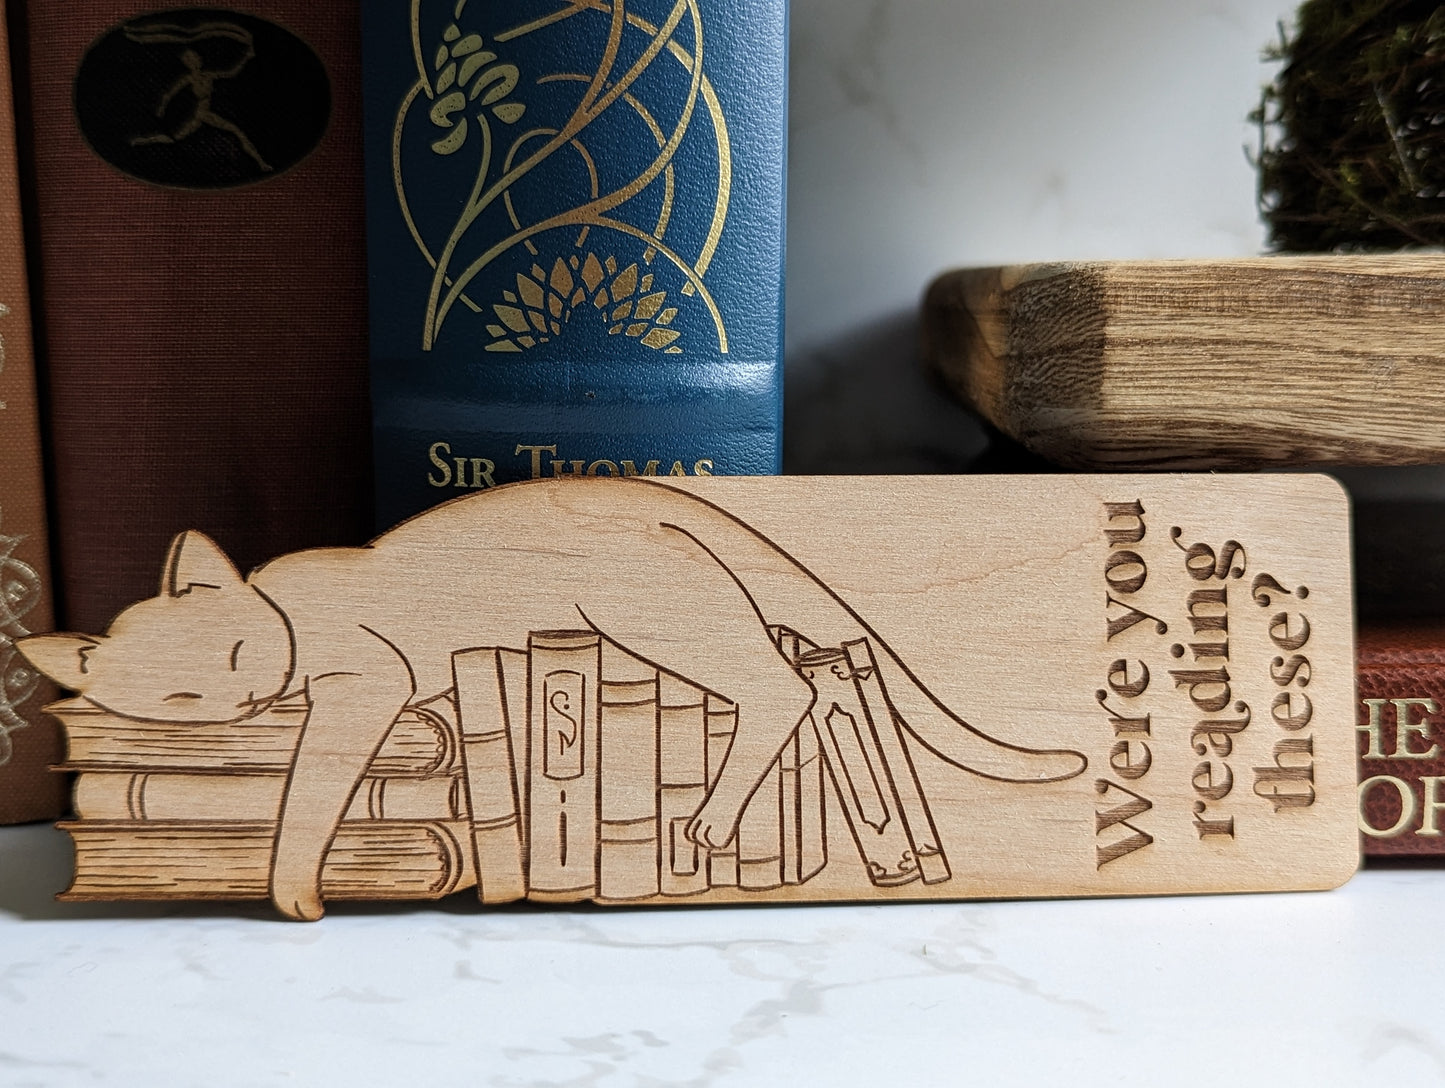 A wooden bookmark of a cat laying on a stack of books that says "were you reading these?"